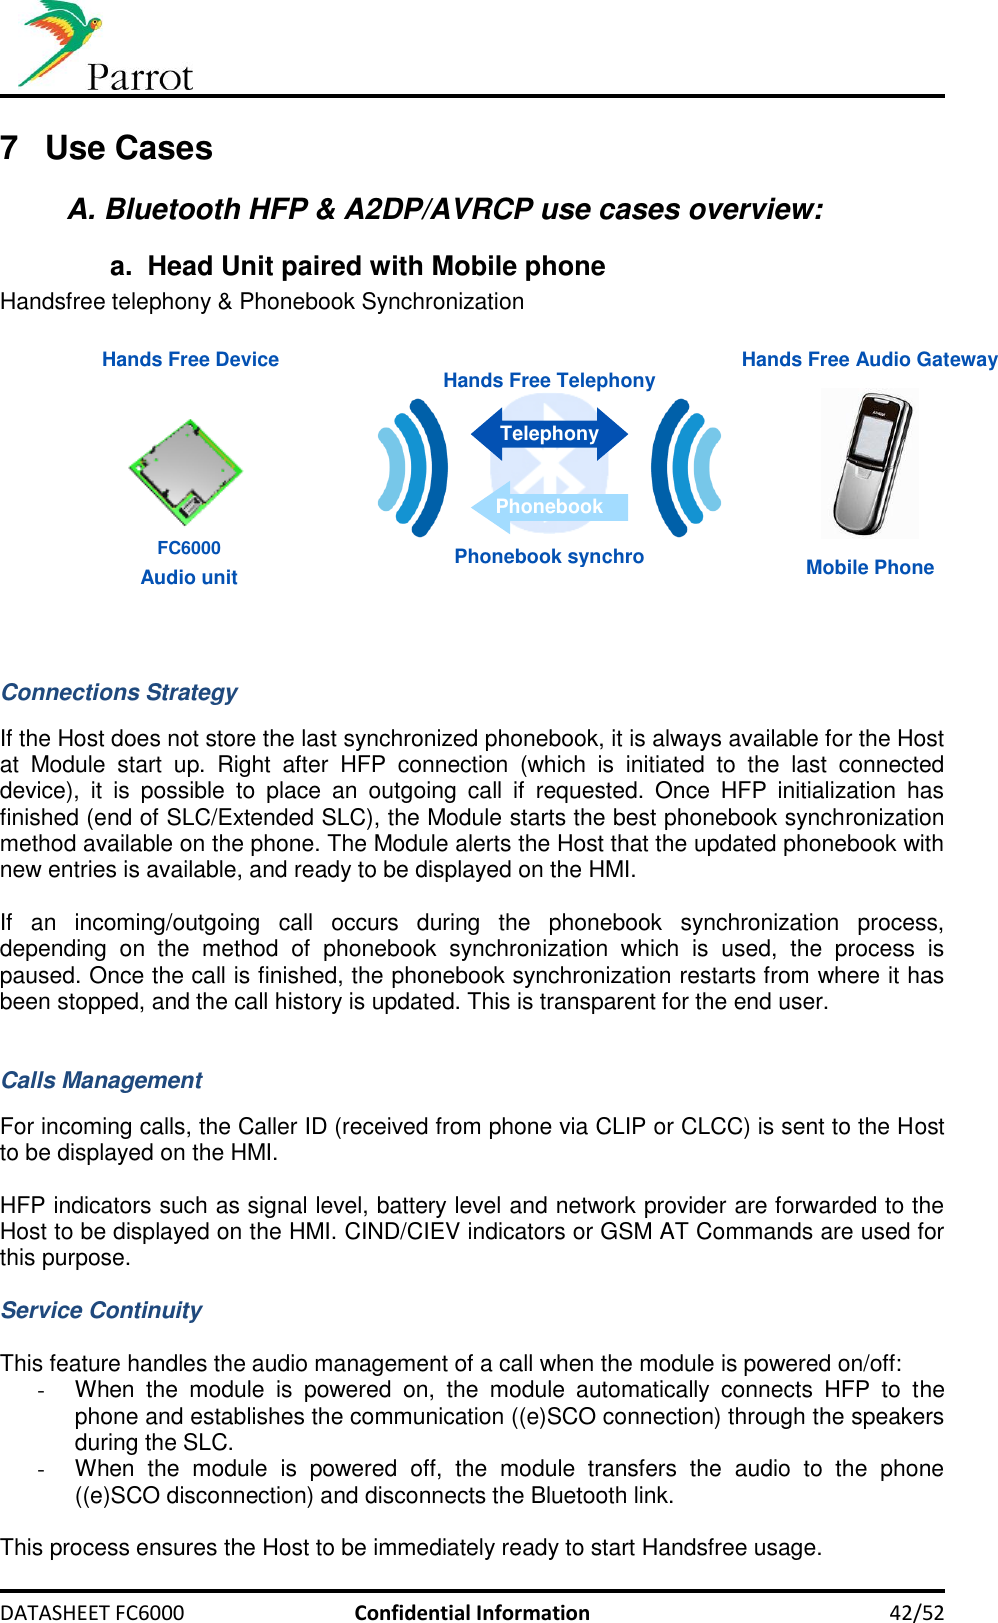     DATASHEET FC6000  Confidential Information 42/52 7  Use Cases A. Bluetooth HFP &amp; A2DP/AVRCP use cases overview: a.  Head Unit paired with Mobile phone  Handsfree telephony &amp; Phonebook Synchronization   Hands Free Audio Gateway Hands Free Device Mobile Phone Audio unit Hands Free Telephony Telephony Phonebook Phonebook synchro FC6000   Connections Strategy  If the Host does not store the last synchronized phonebook, it is always available for the Host at  Module  start  up.  Right  after  HFP  connection  (which  is  initiated  to  the  last  connected device),  it  is  possible  to  place  an  outgoing  call  if  requested.  Once  HFP  initialization  has finished (end of SLC/Extended SLC), the Module starts the best phonebook synchronization method available on the phone. The Module alerts the Host that the updated phonebook with new entries is available, and ready to be displayed on the HMI.  If  an  incoming/outgoing  call  occurs  during  the  phonebook  synchronization  process, depending  on  the  method  of  phonebook  synchronization  which  is  used,  the  process  is paused. Once the call is finished, the phonebook synchronization restarts from where it has been stopped, and the call history is updated. This is transparent for the end user.   Calls Management  For incoming calls, the Caller ID (received from phone via CLIP or CLCC) is sent to the Host to be displayed on the HMI.  HFP indicators such as signal level, battery level and network provider are forwarded to the Host to be displayed on the HMI. CIND/CIEV indicators or GSM AT Commands are used for this purpose.  Service Continuity  This feature handles the audio management of a call when the module is powered on/off: -  When  the  module  is  powered  on,  the  module  automatically  connects  HFP  to  the phone and establishes the communication ((e)SCO connection) through the speakers during the SLC. -  When  the  module  is  powered  off,  the  module  transfers  the  audio  to  the  phone ((e)SCO disconnection) and disconnects the Bluetooth link.  This process ensures the Host to be immediately ready to start Handsfree usage.  